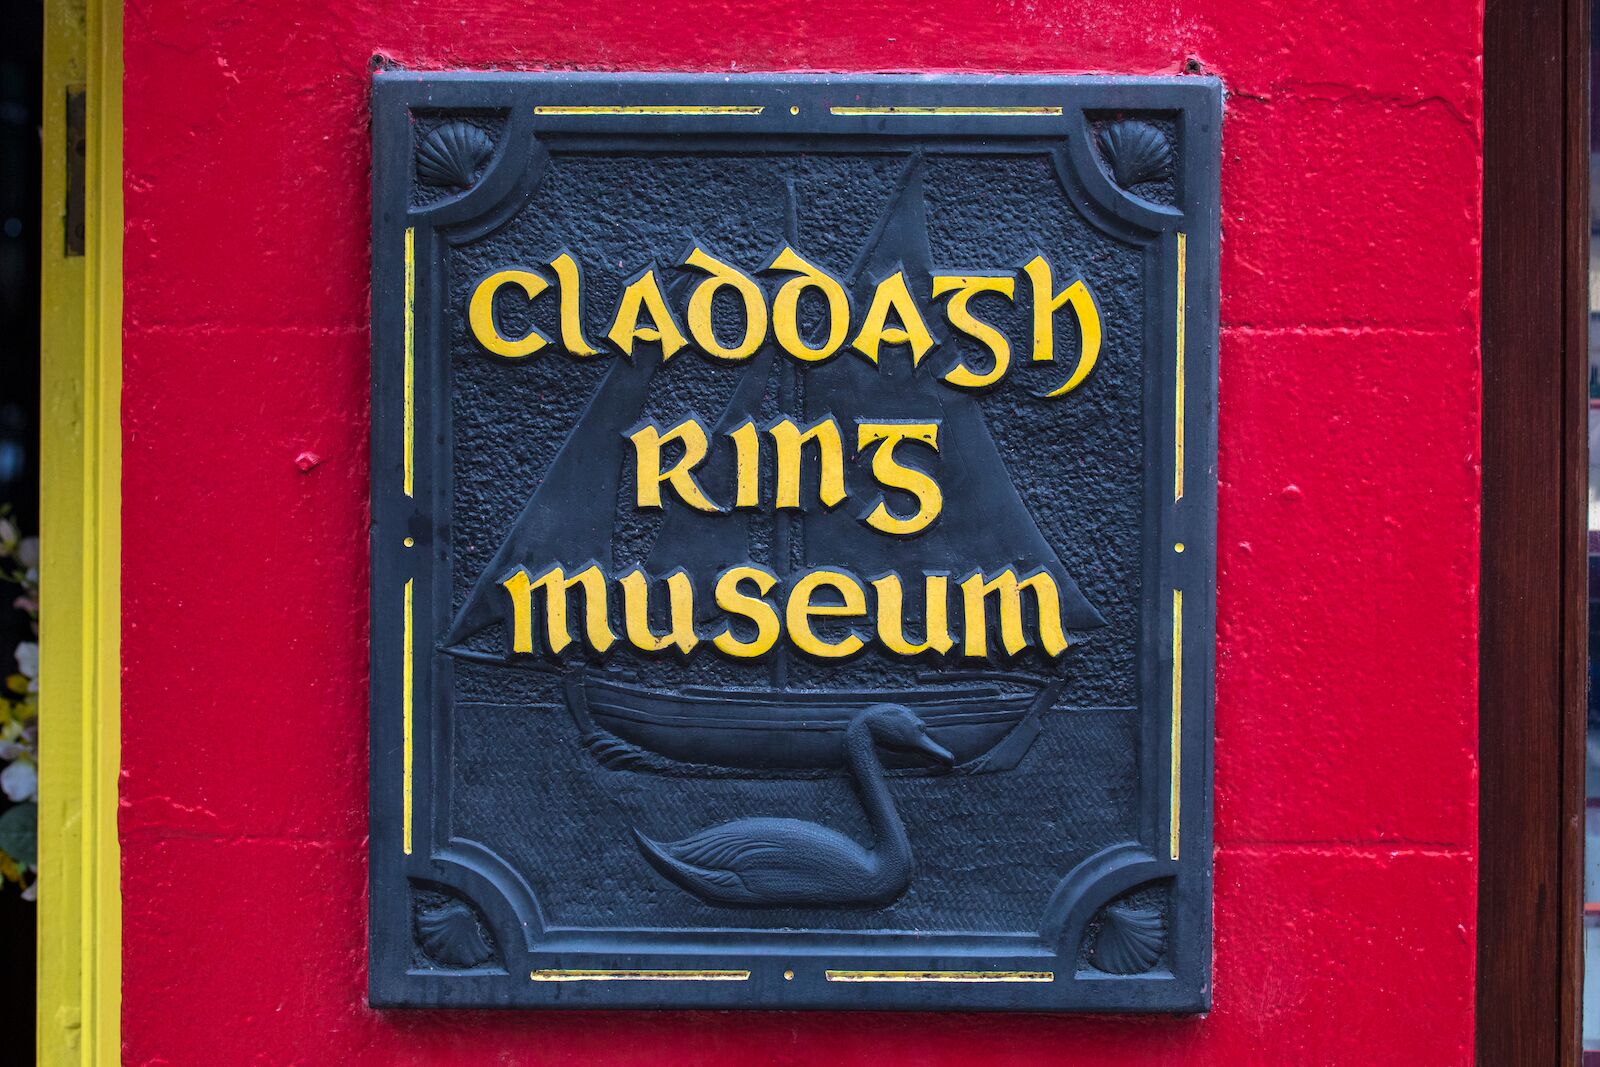 Sign for the Claddagh Ring Museum in Galway, Ireland